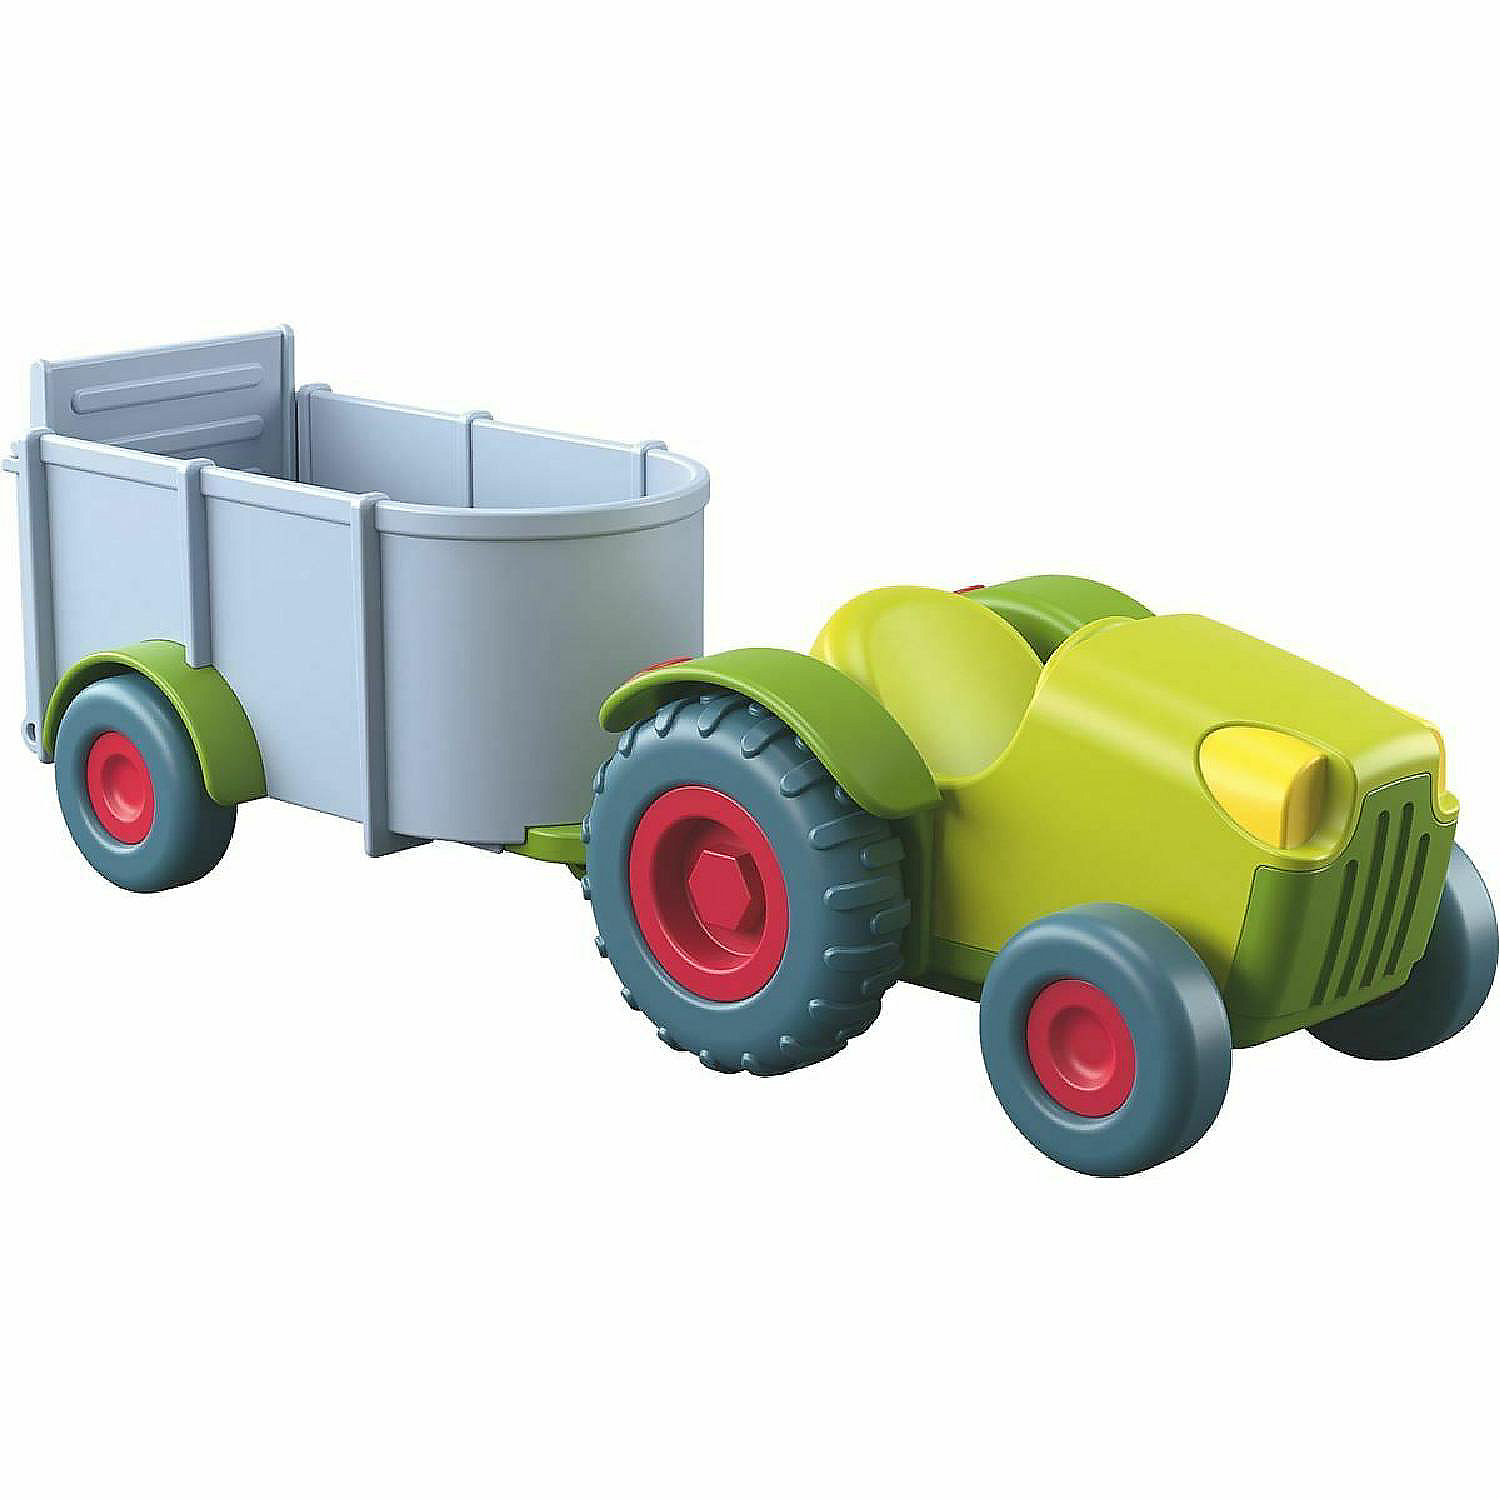 HABA Little Friends Tractor and Trailer 2 Piece Farm Play Set Movable Oriental Trading